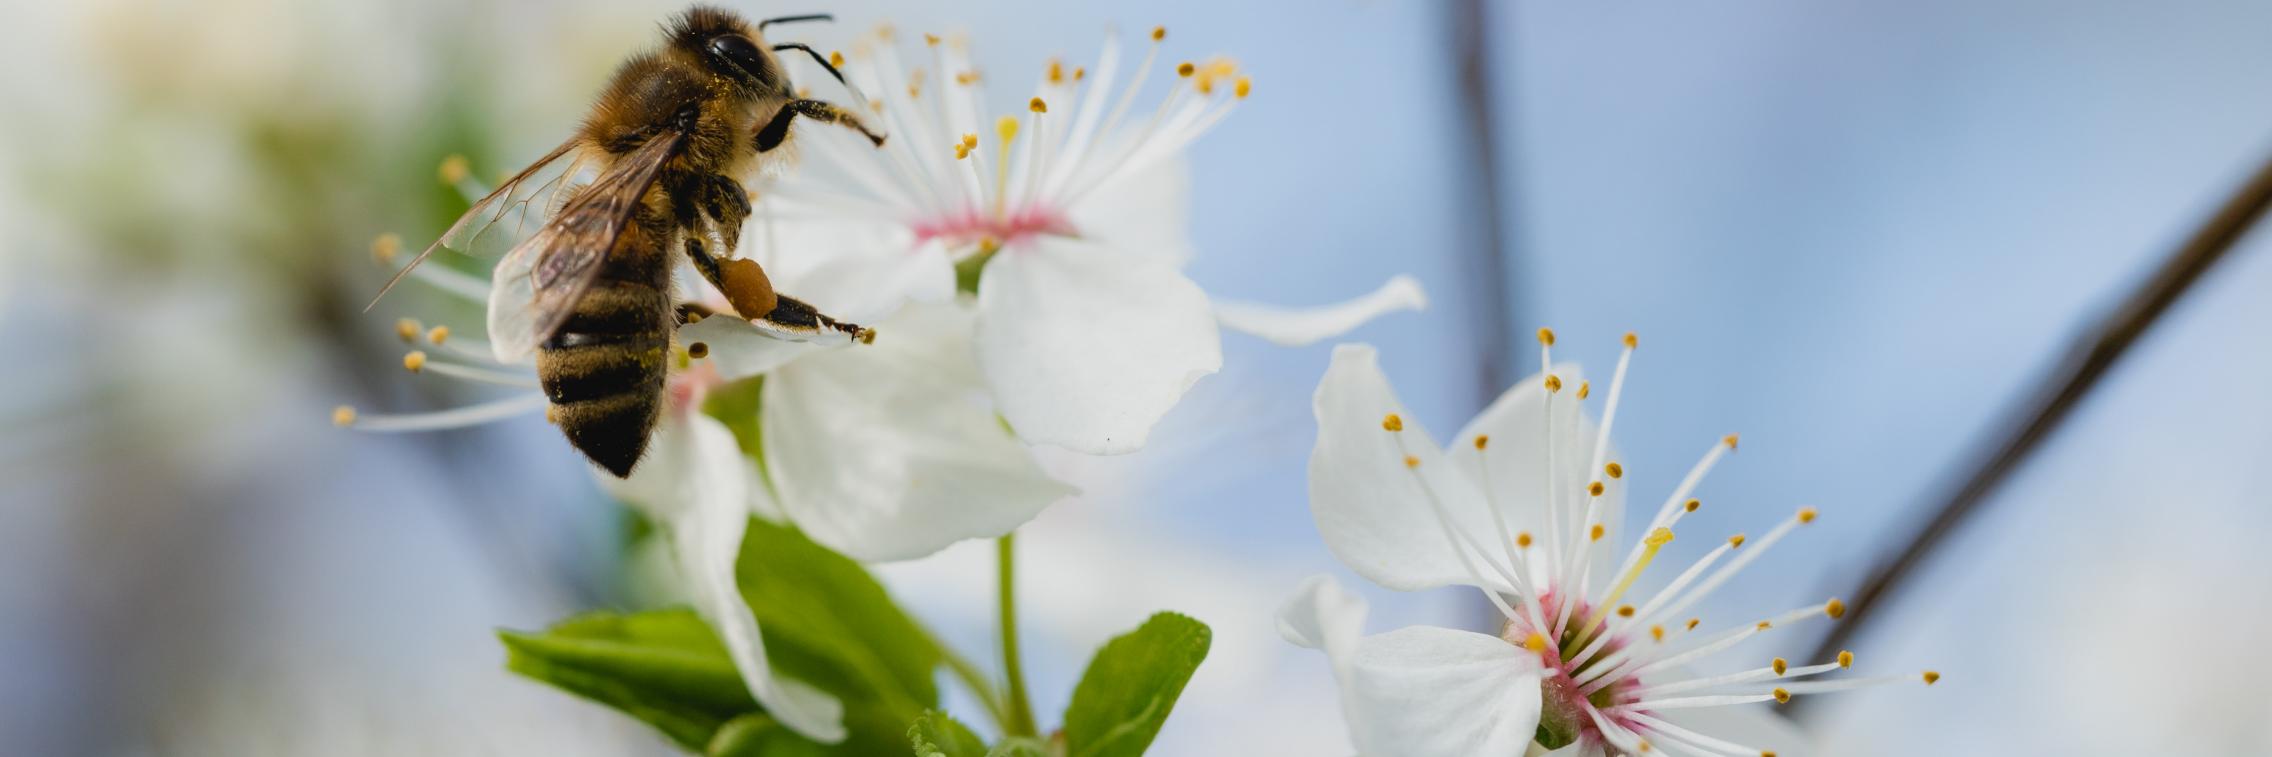 Protecting crops by preserving their pollinators